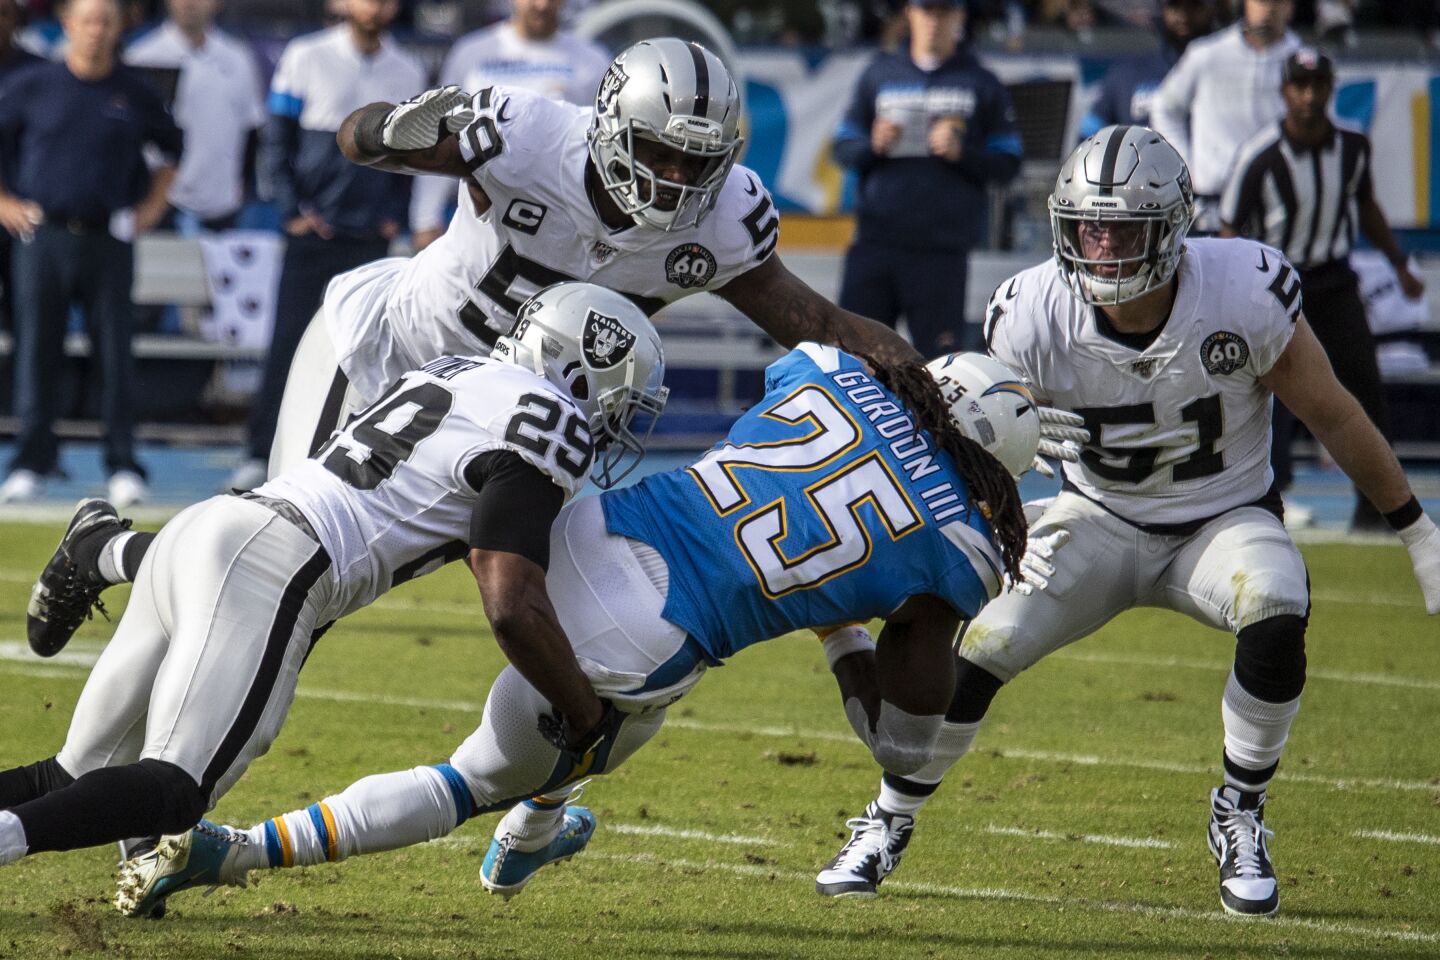 Chargers running back Melvin Gordon is brought down by Oakland Raiders free safety Lamarcus Joyner during the first quarter.